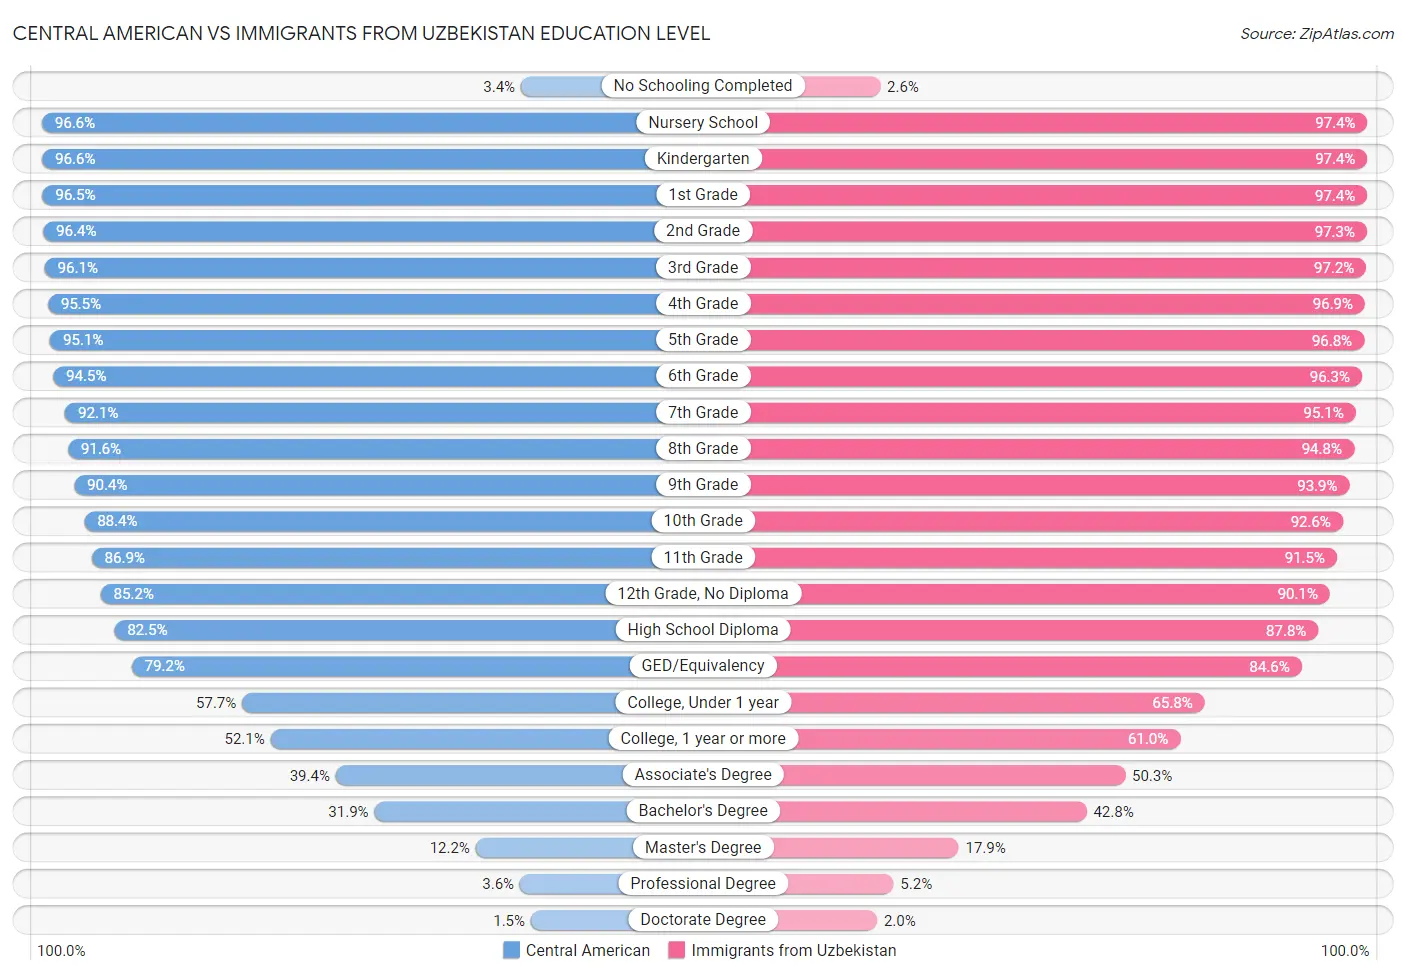 Central American vs Immigrants from Uzbekistan Education Level